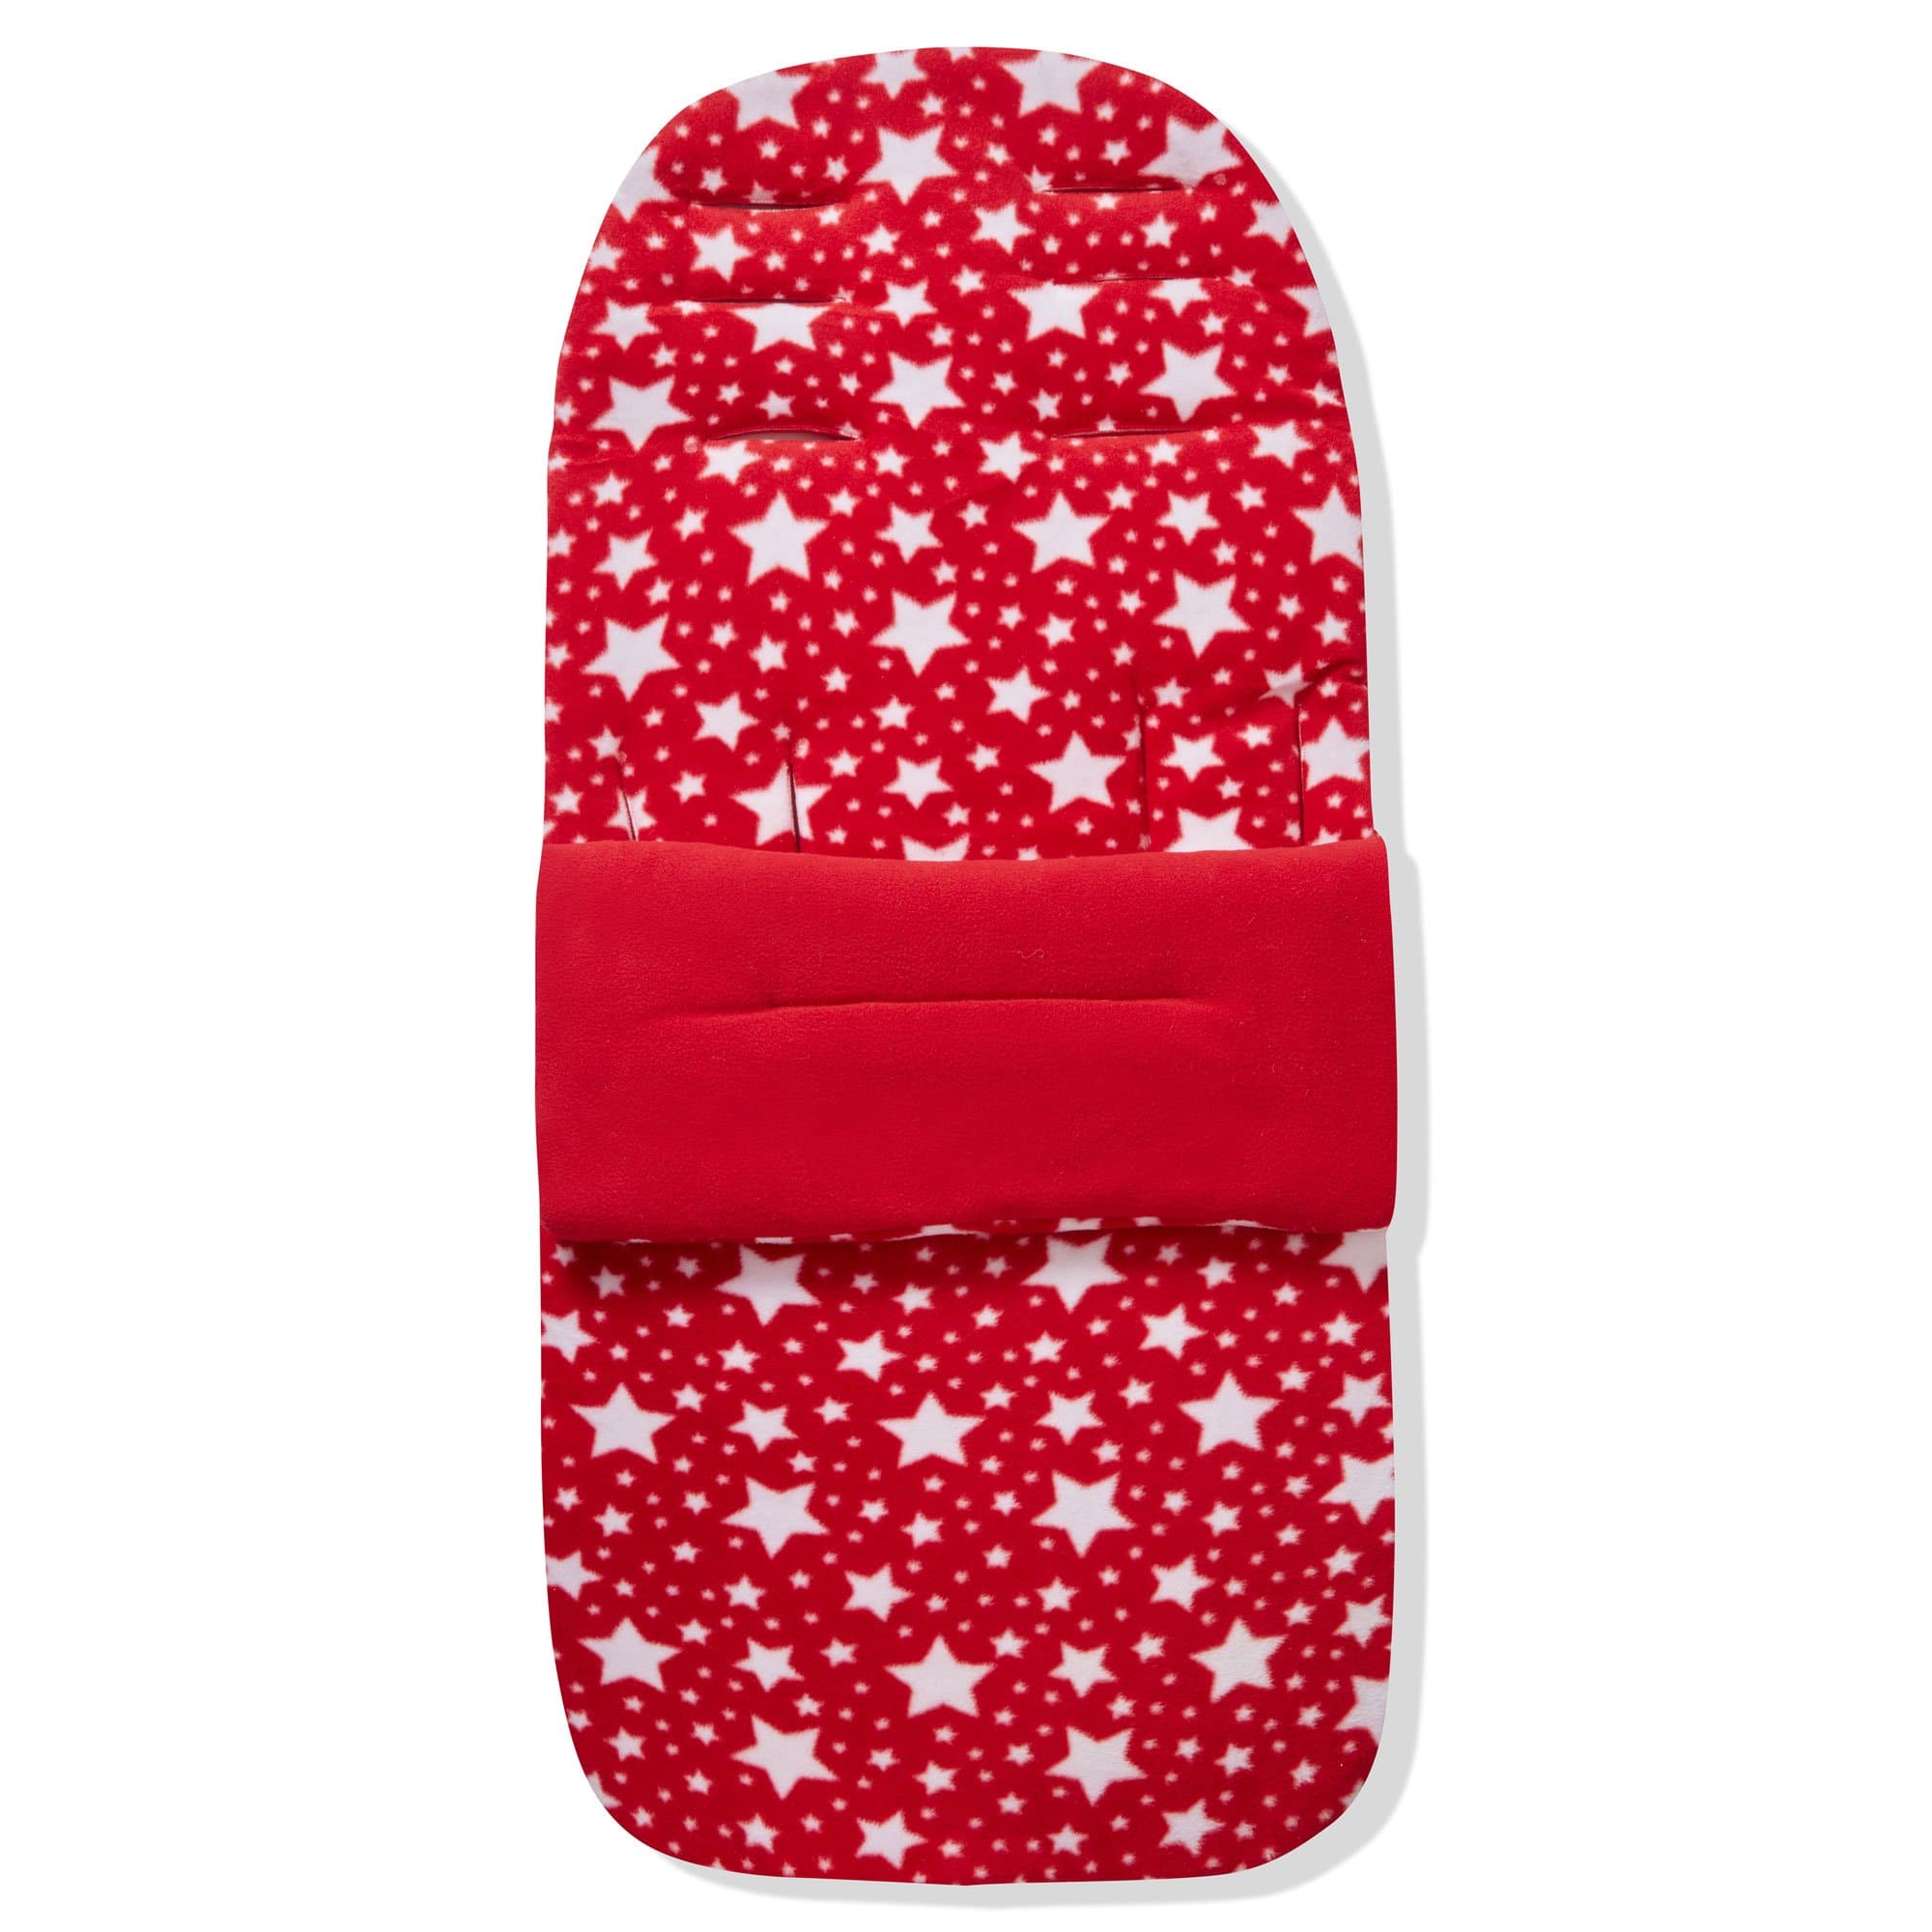 Fleece Footmuff / Cosy Toes Compatible with Out 'n' About - Red Star / Fits All Models | For Your Little One